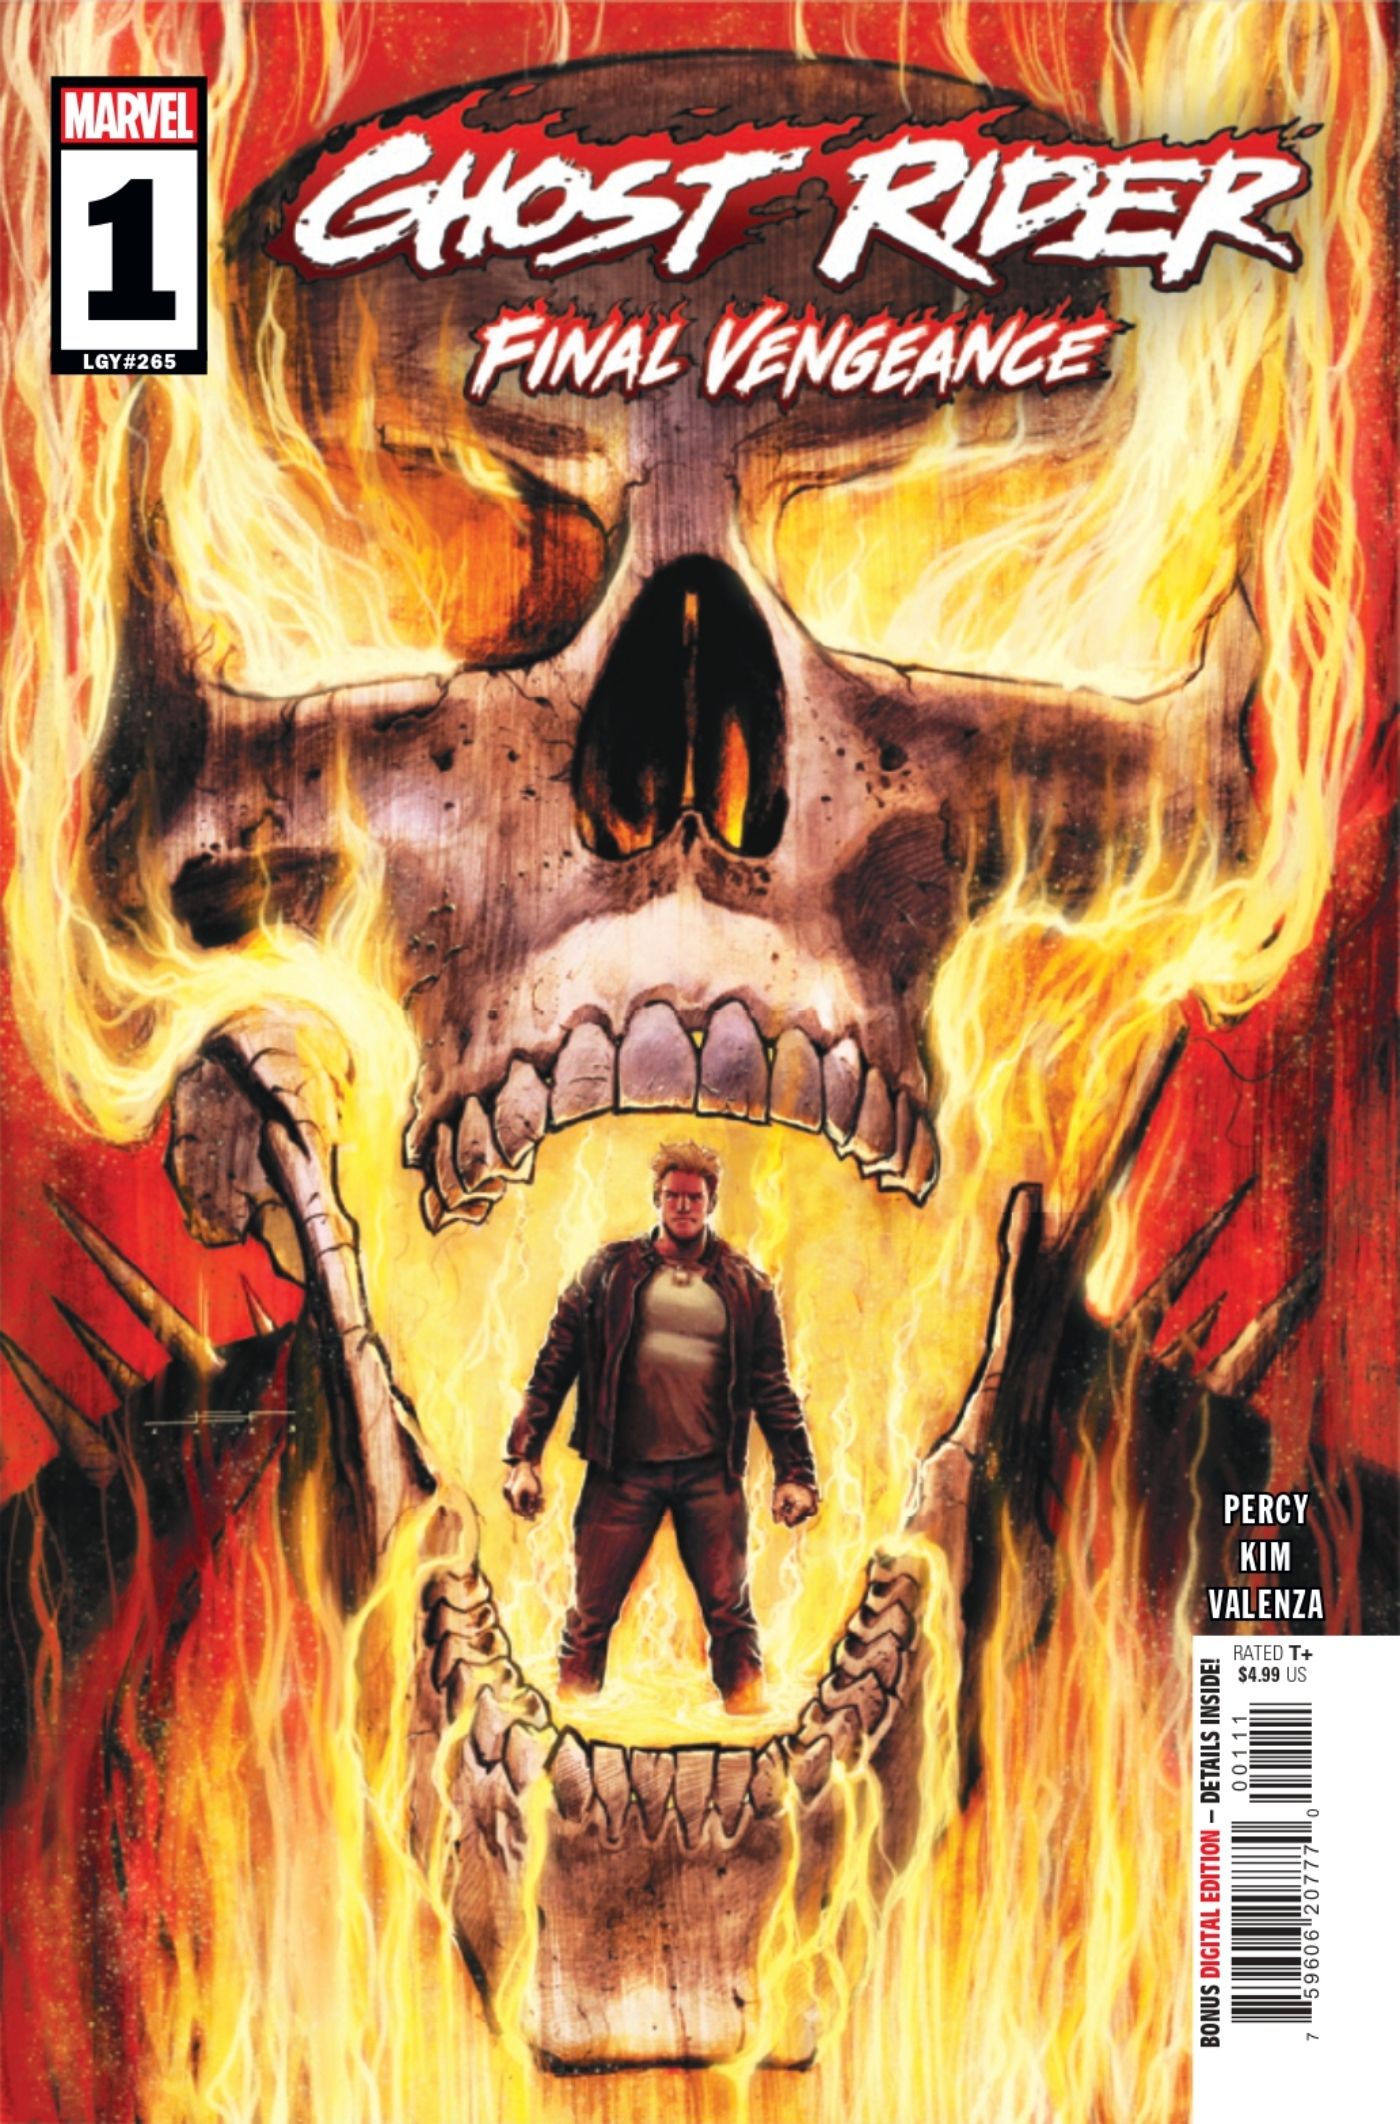 Ghost Rider: Final Vengeance #1 cover featuring Johnny Blaze in Ghost Rider's mouth.